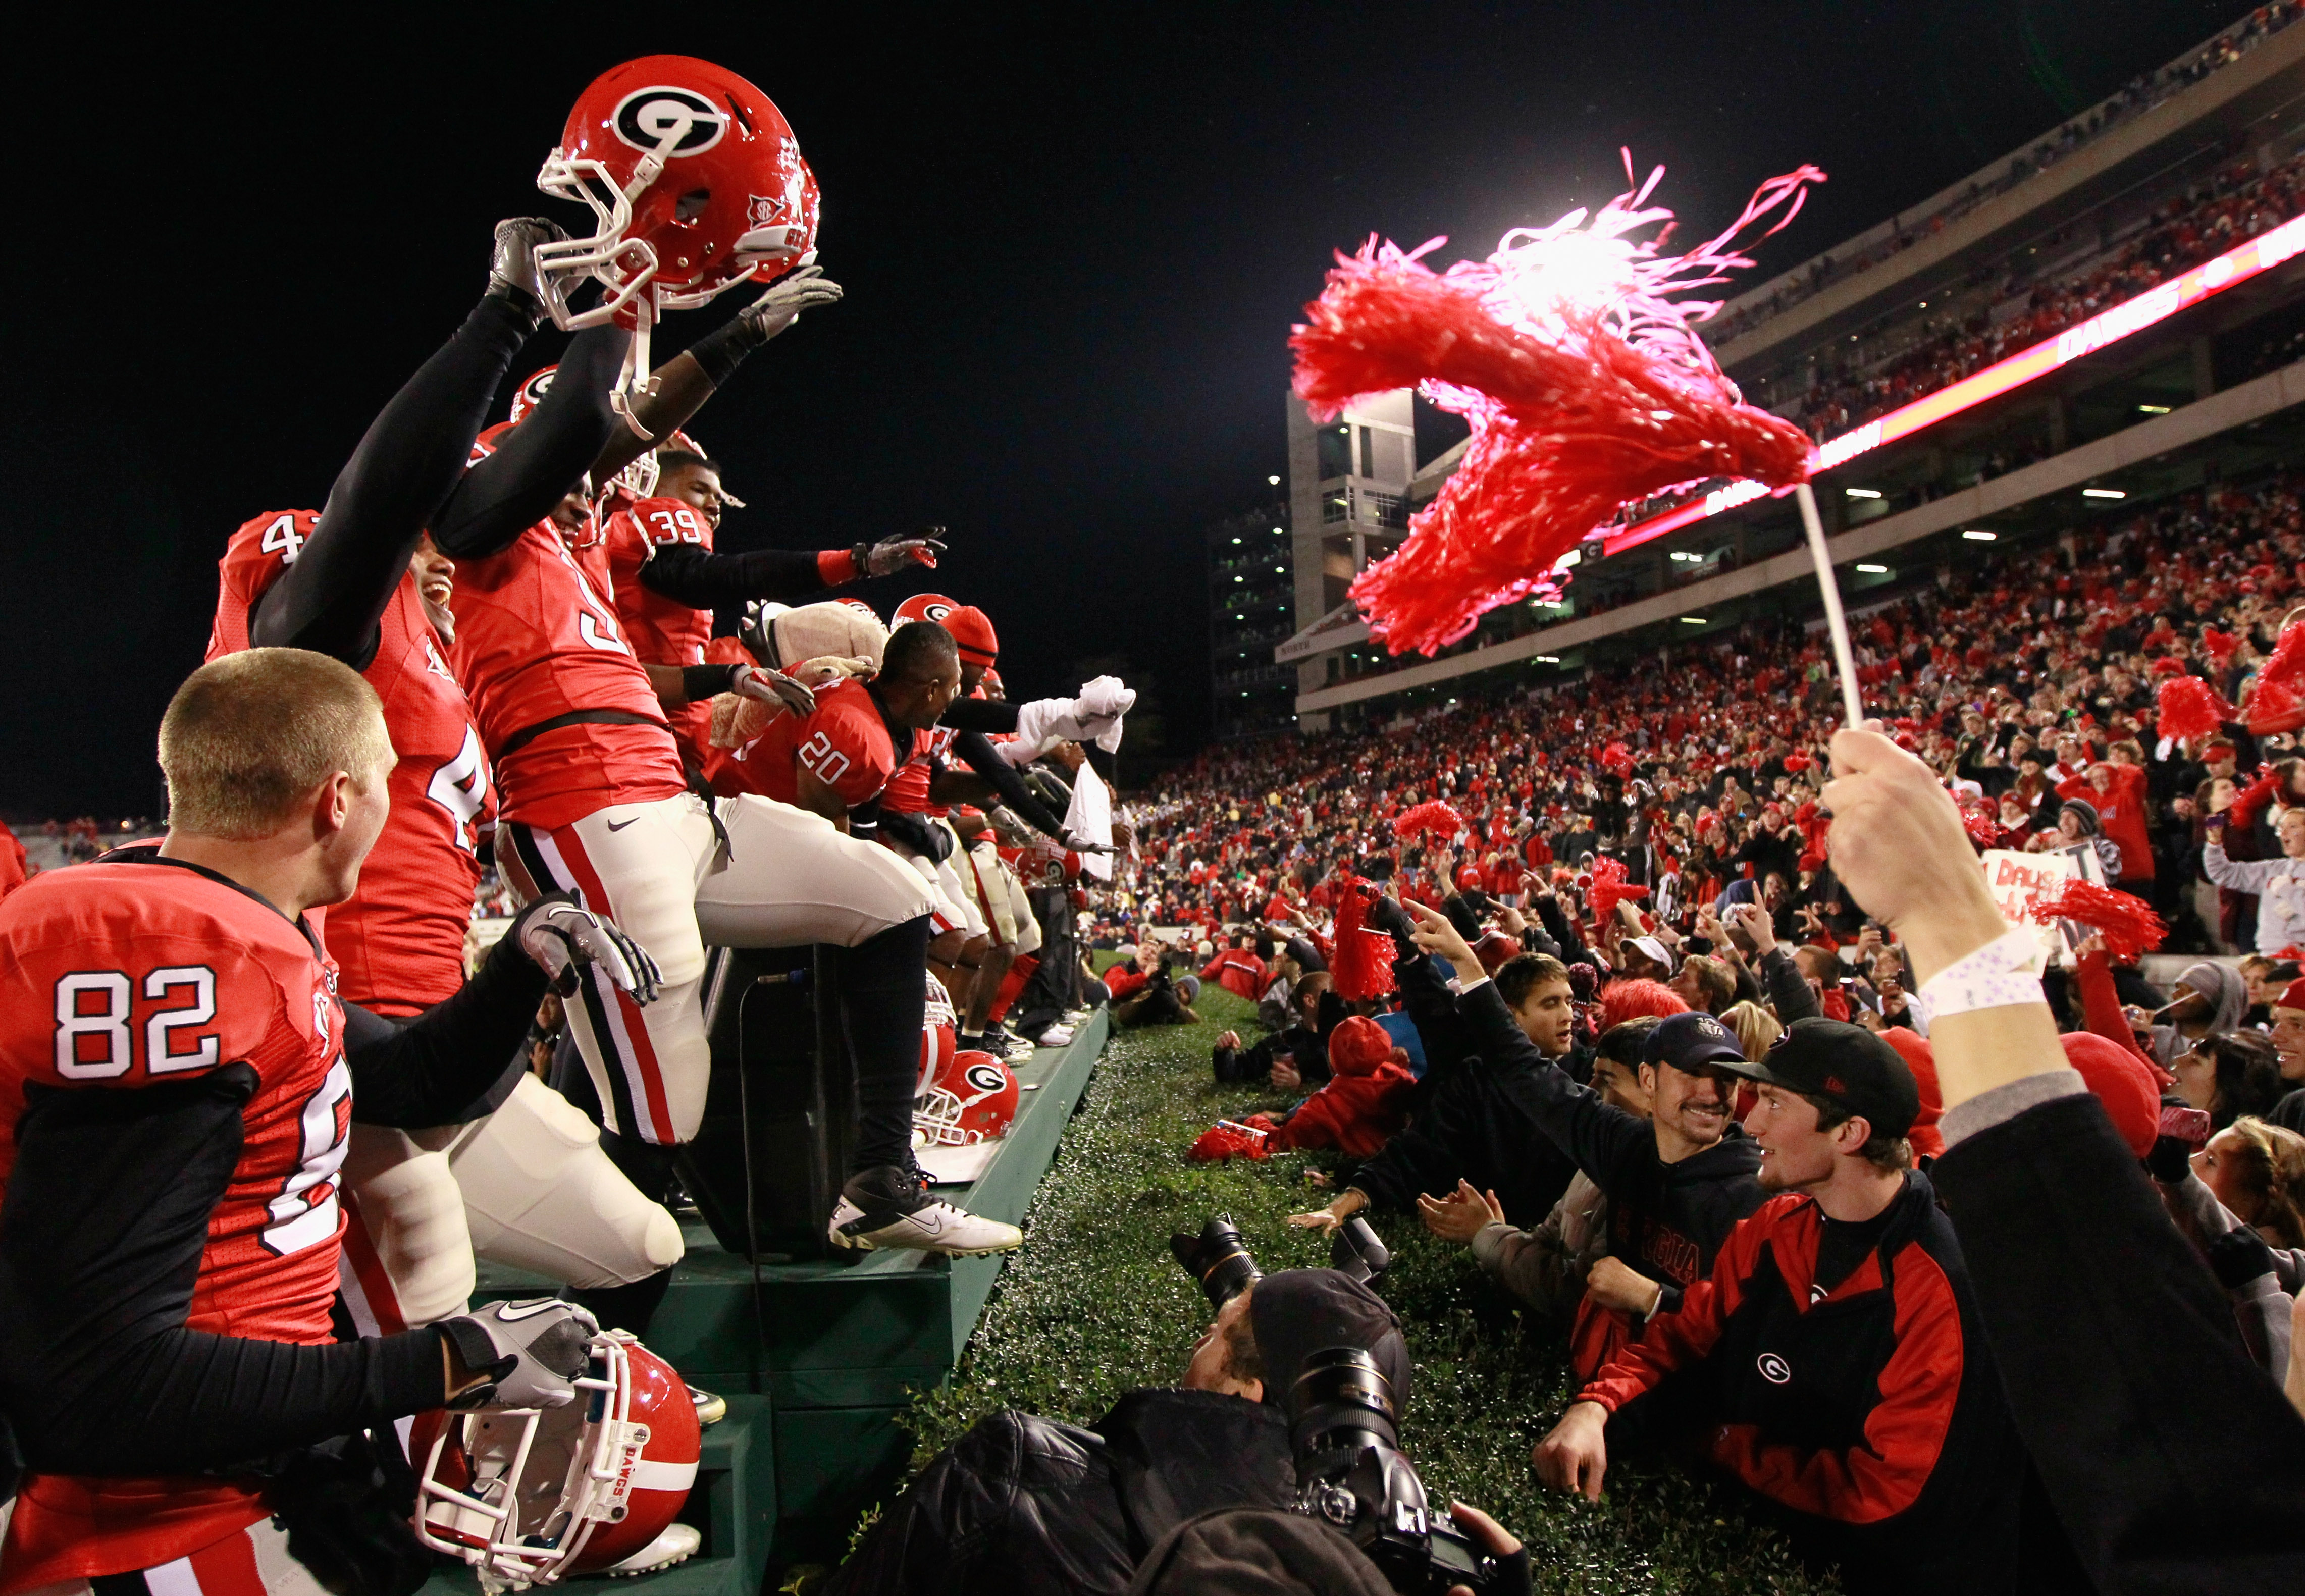 ATHENS, GA - NOVEMBER 27:  The Georgia Bulldogs celebrate their 42-34 win over the Georgia Tech Yellow Jackets at Sanford Stadium on November 27, 2010 in Athens, Georgia.  (Photo by Kevin C. Cox/Getty Images)